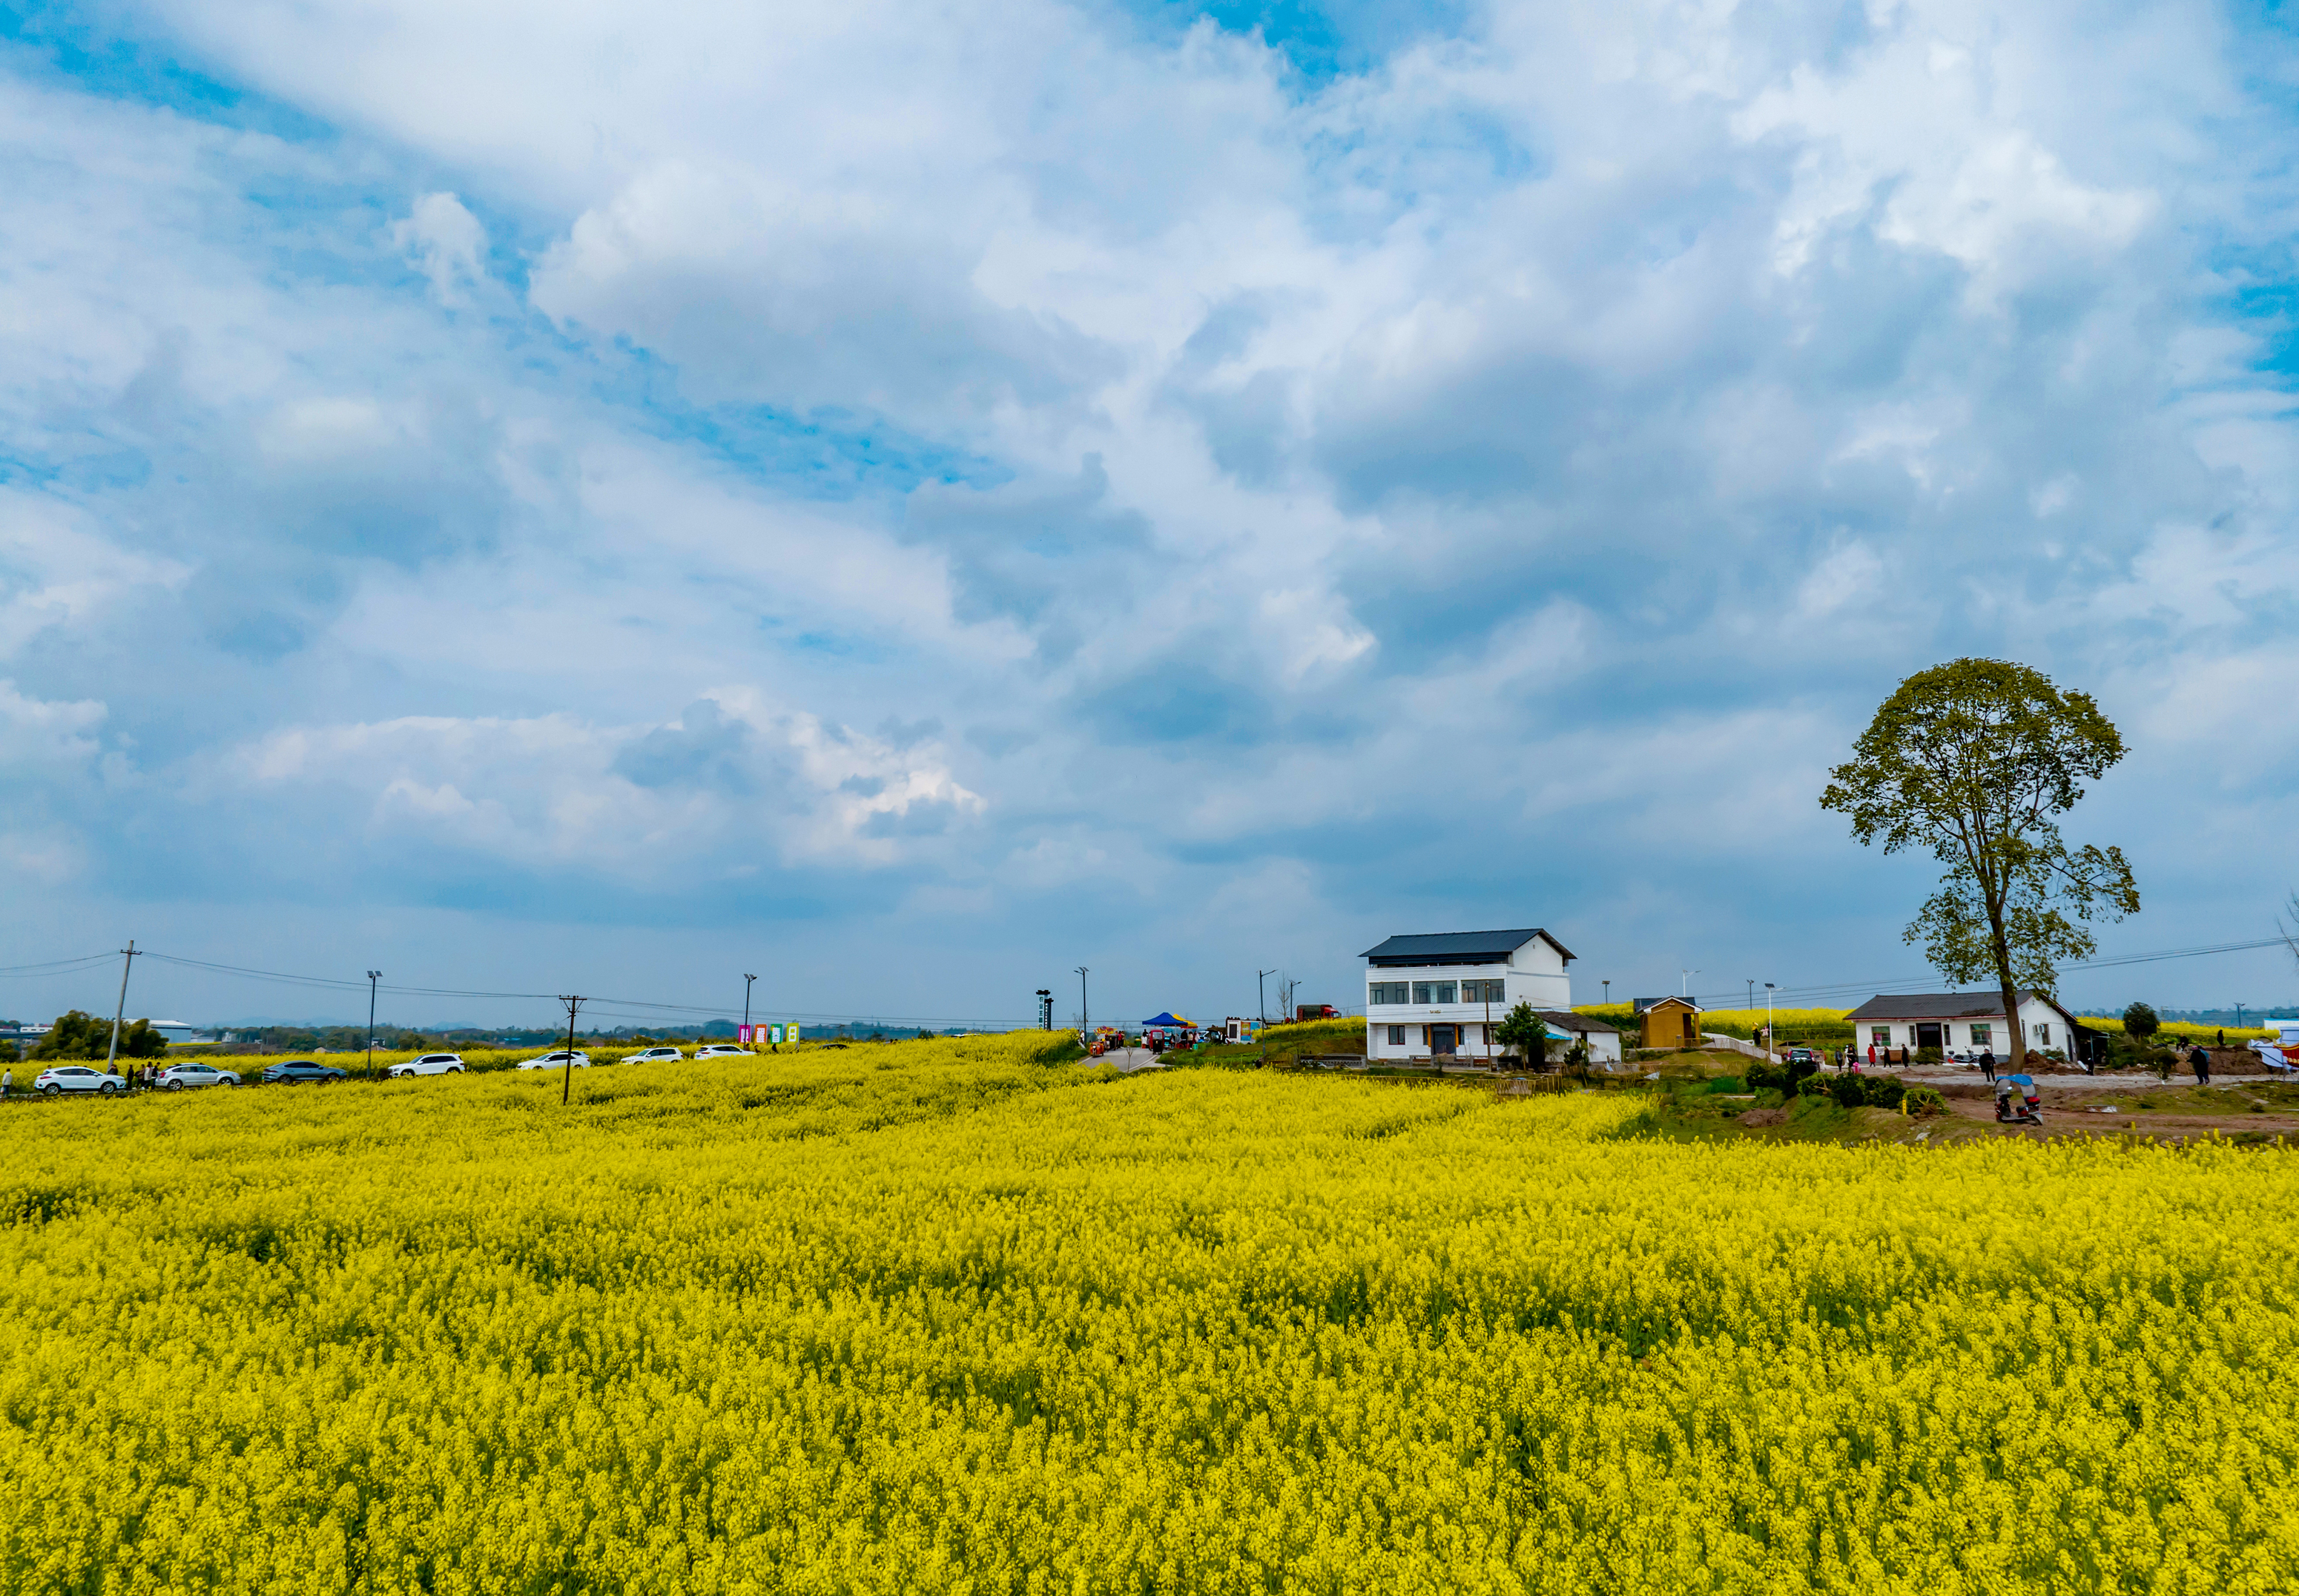 The blooming rapeseed flowers, together with a cloudy sky, form a picturesque view in Zenggongqiao Village of Guang'an City, southwest China's Sichuan Province on March 7, 2024. /IC